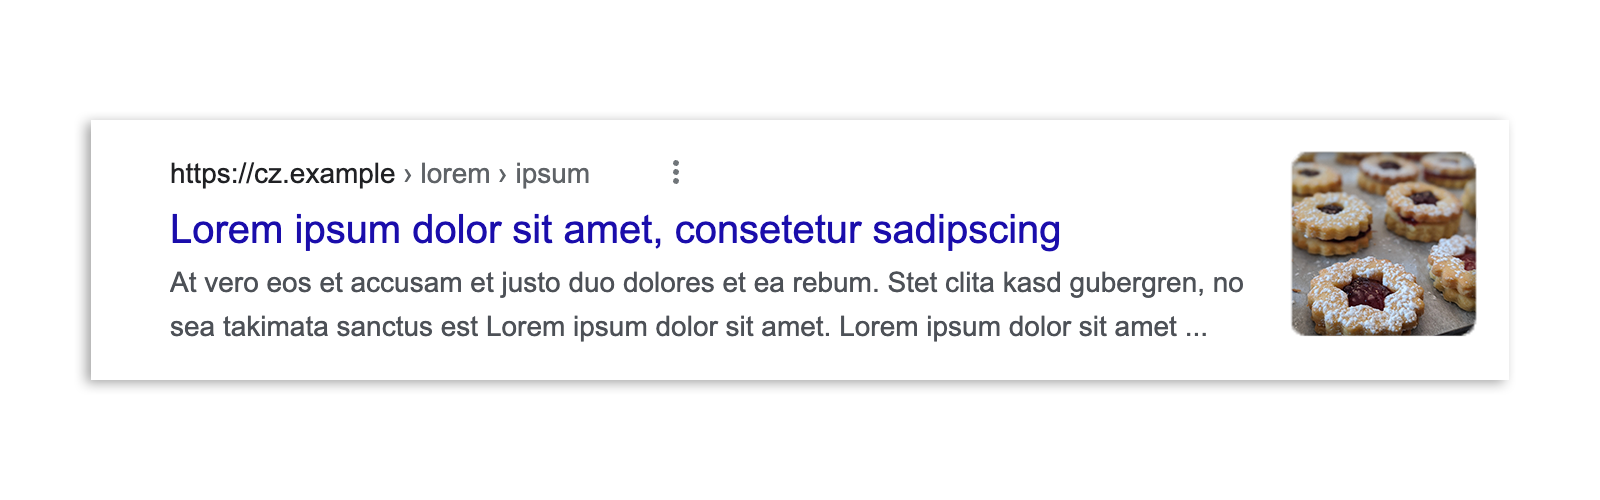 A Google Search result in Czechia before the law is enacted, which shows a snippet of the article, an image preview, the headline, and the URL.